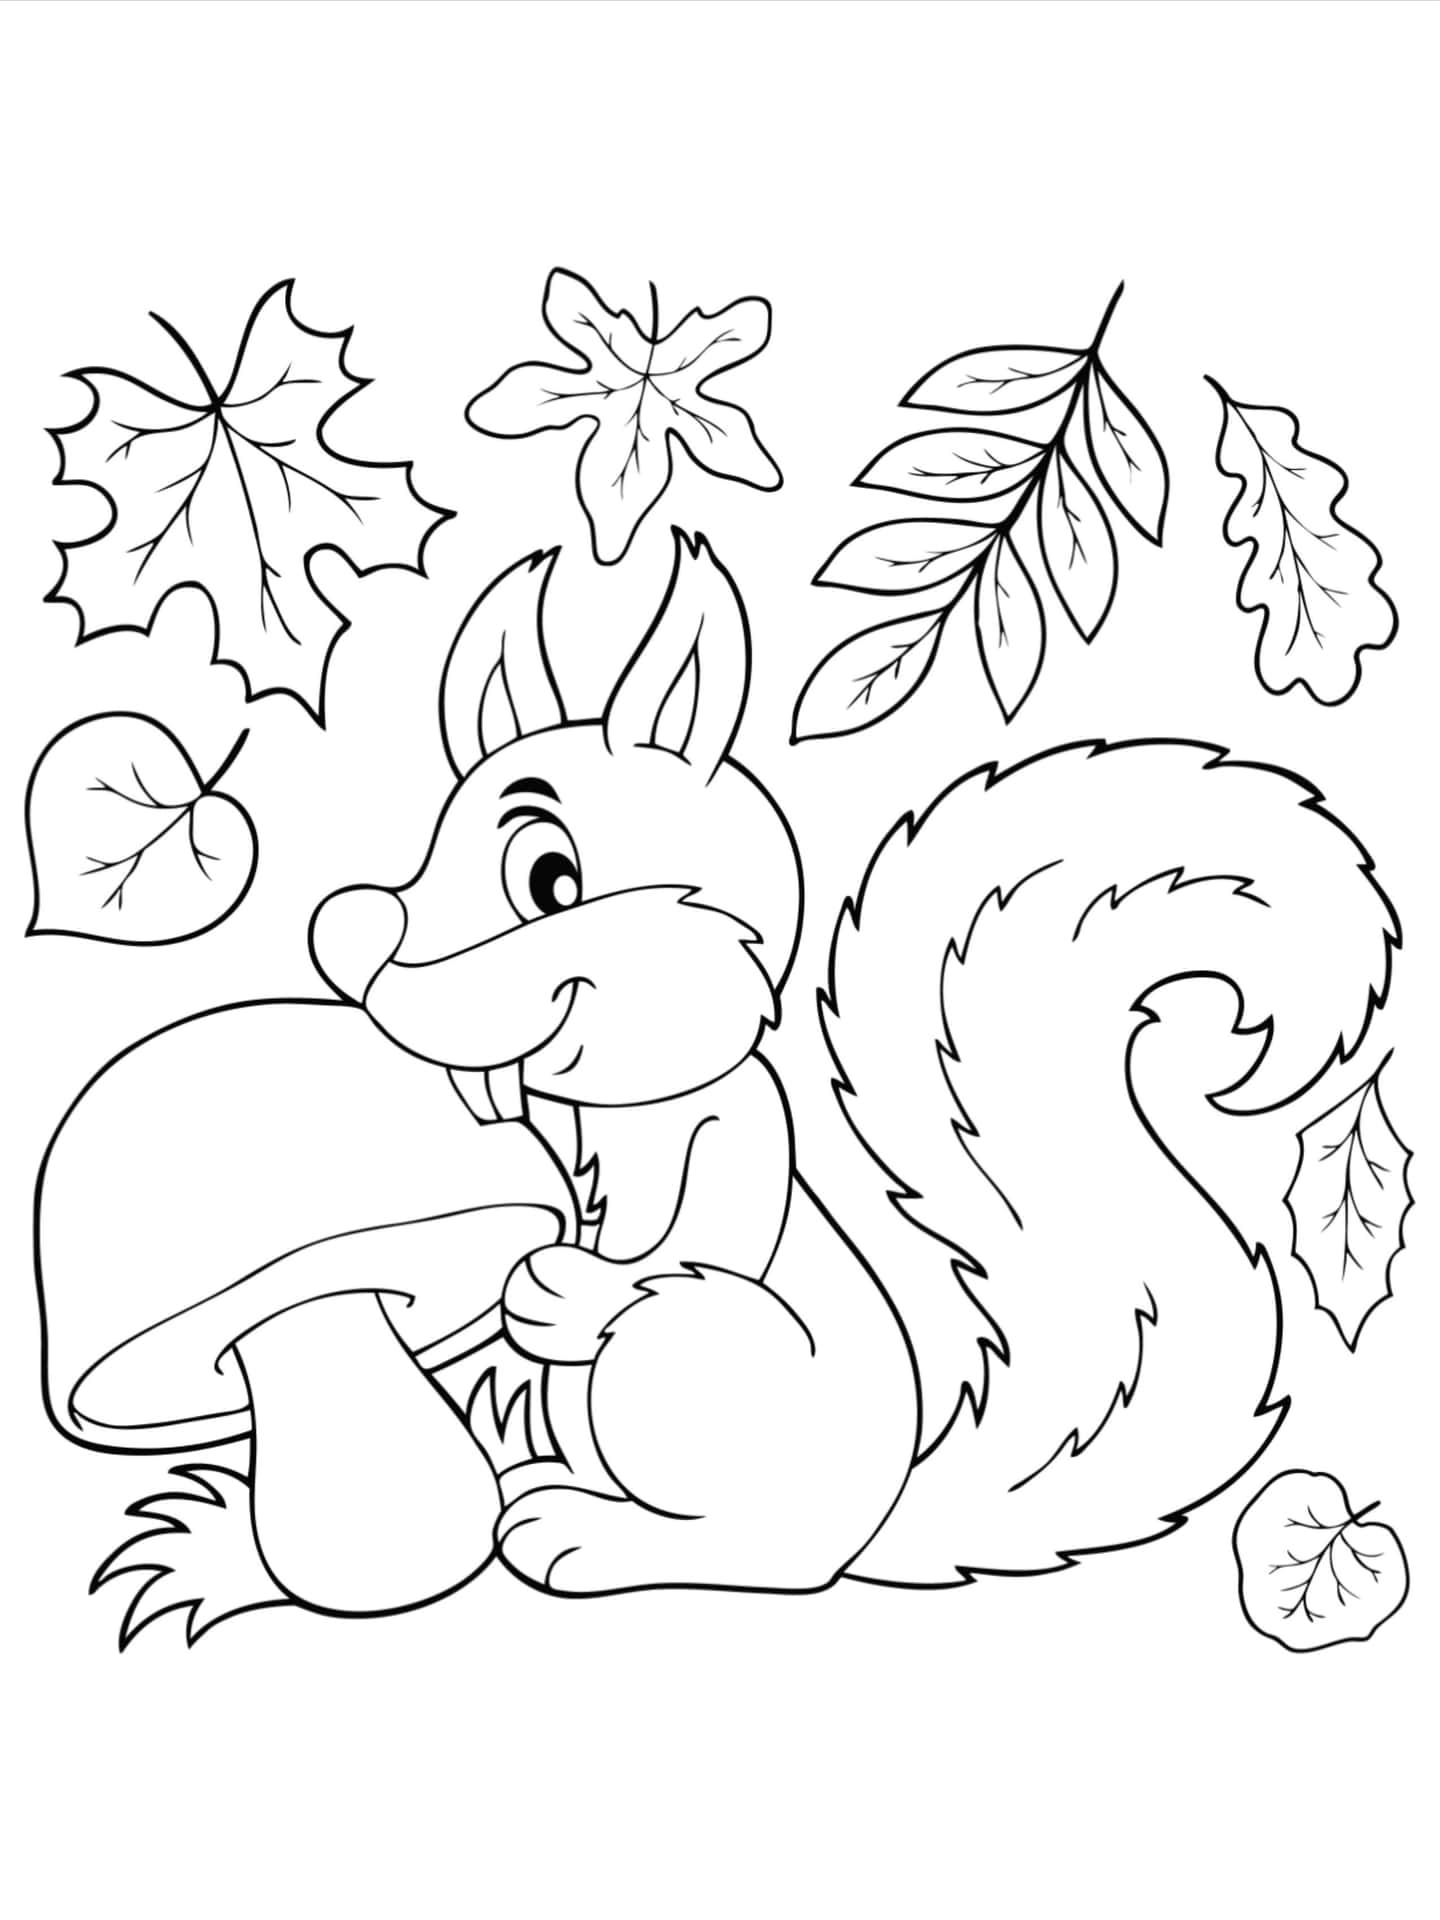 A Squirrel Coloring Page With Leaves And Mushrooms